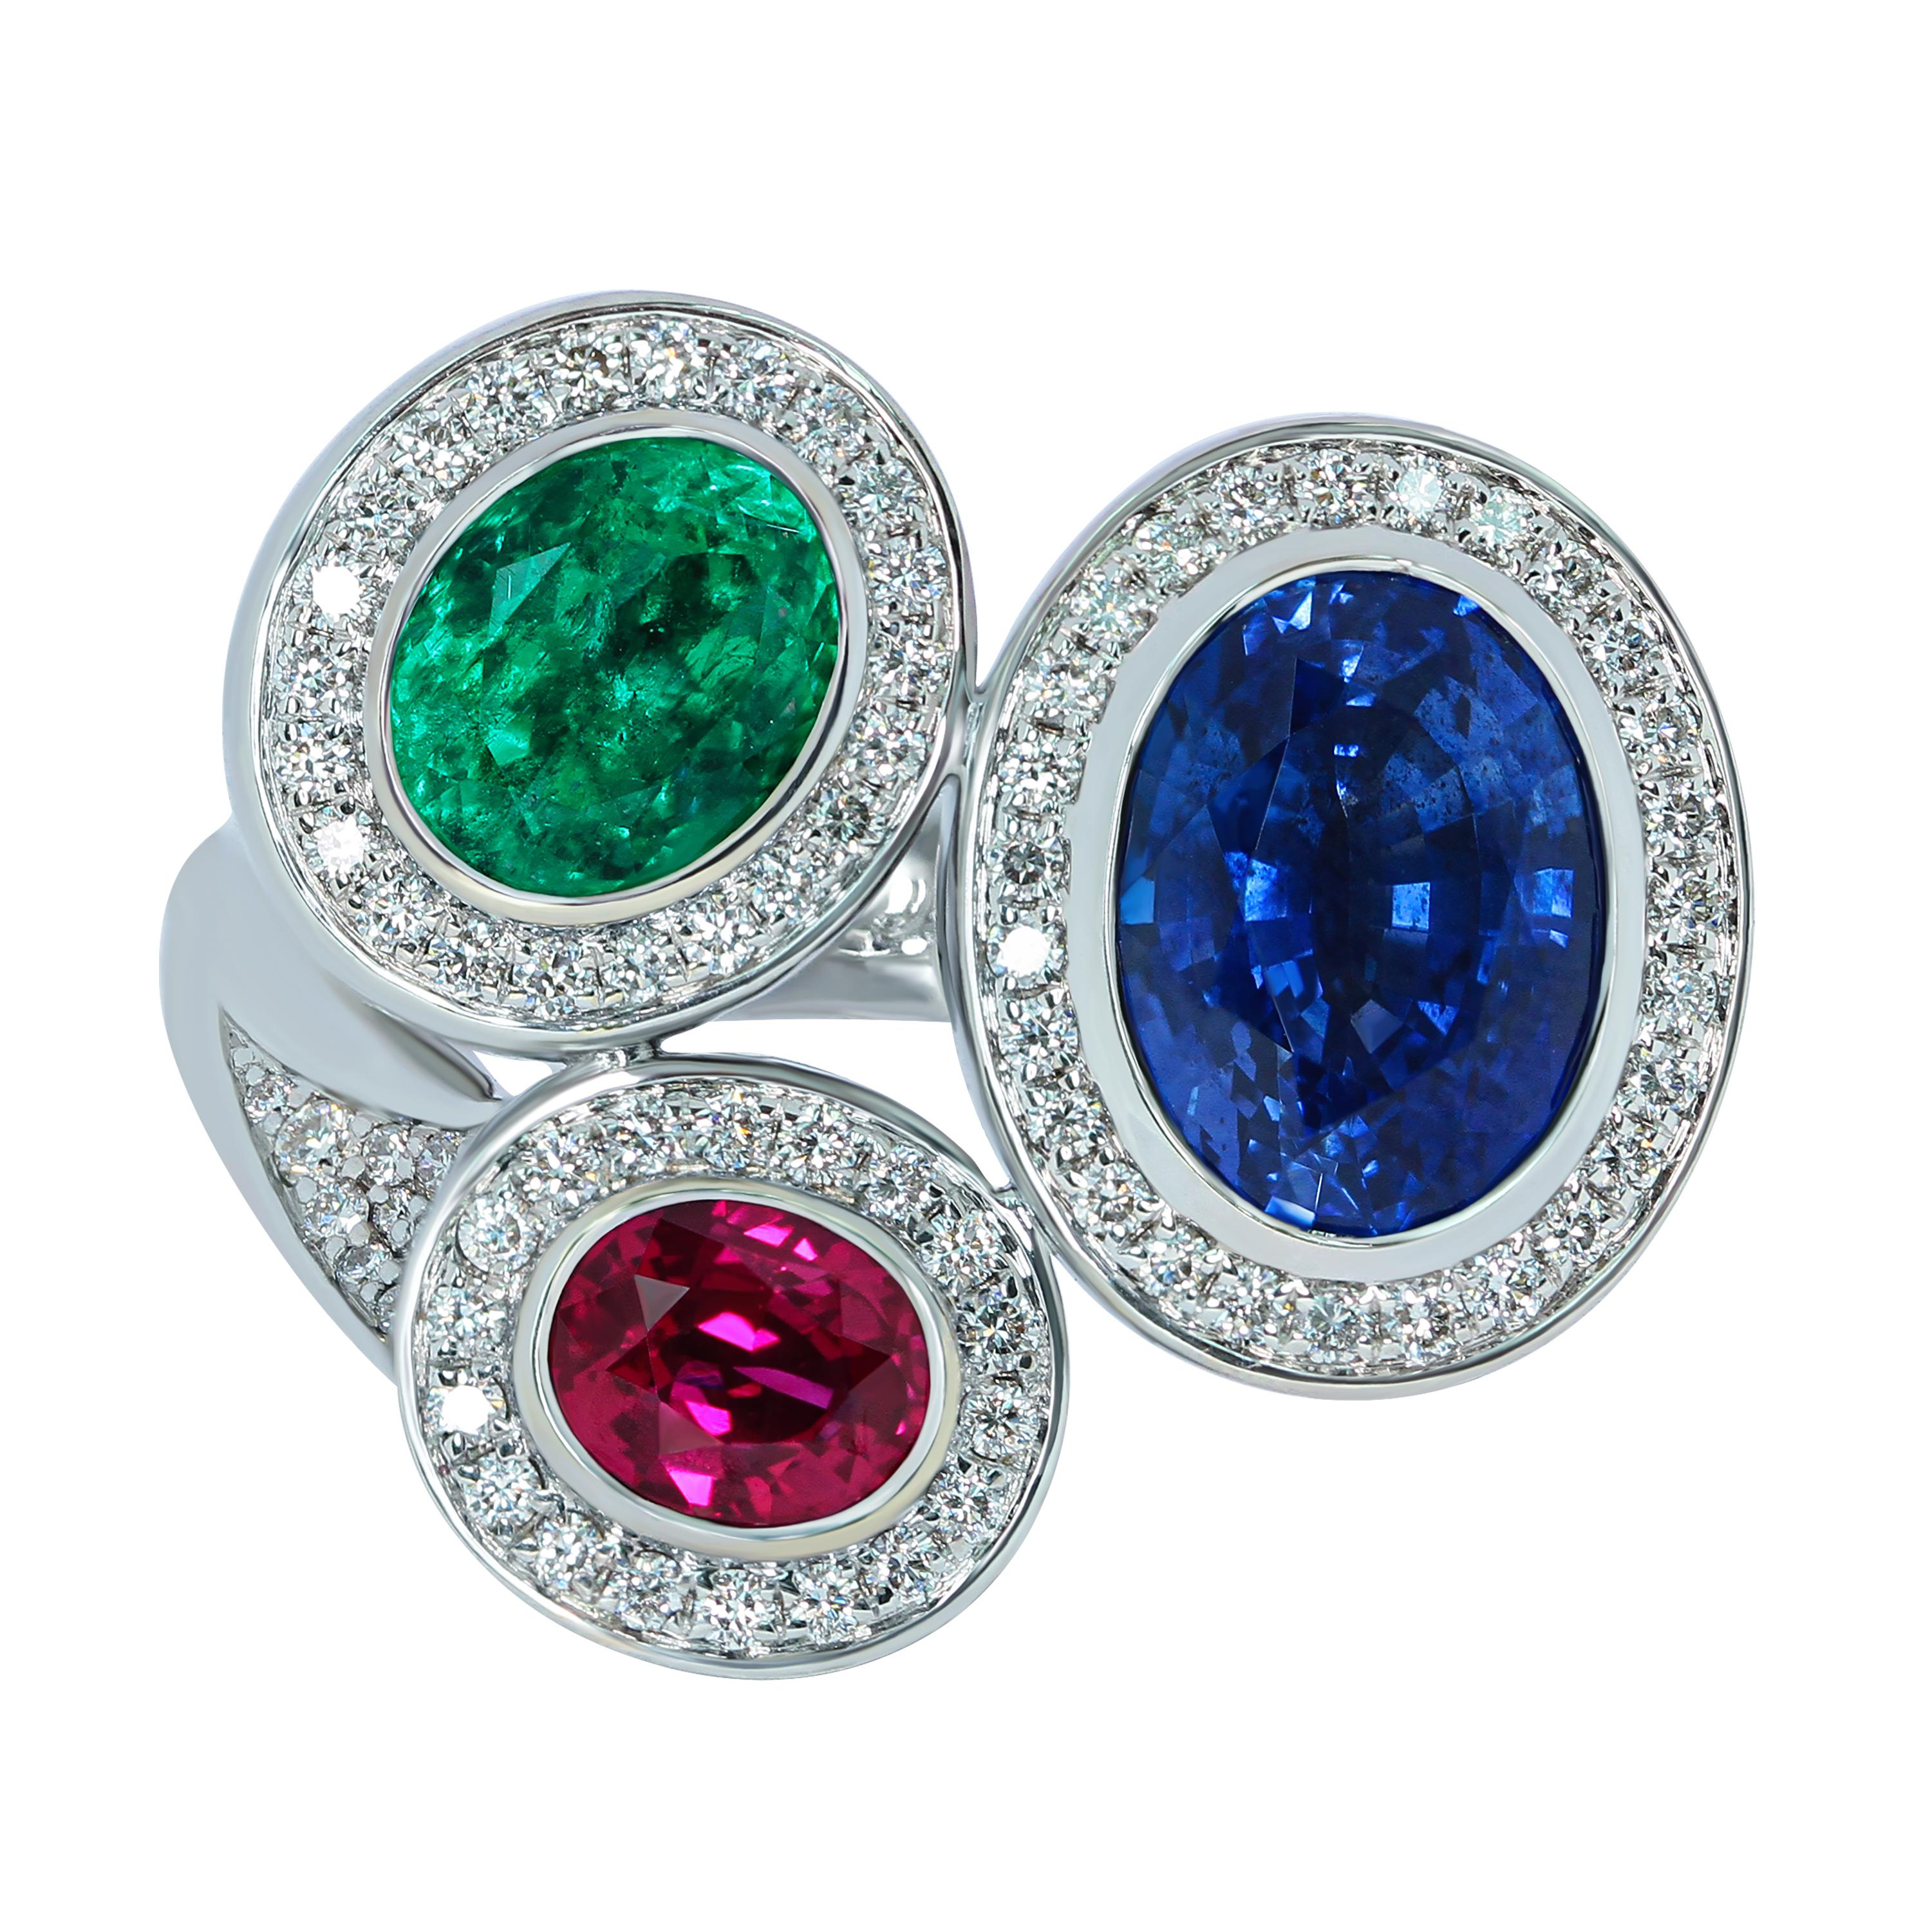 Ruby Emerald Blue Sapphire Diamonds 18 Karat White Gold Trio Ring
Sparkling combination of style and colour. The Ring «TRIO», from High Jewelry collection, is made of White 18 Karat White Gold, decorated with 141 Diamonds and three most popular